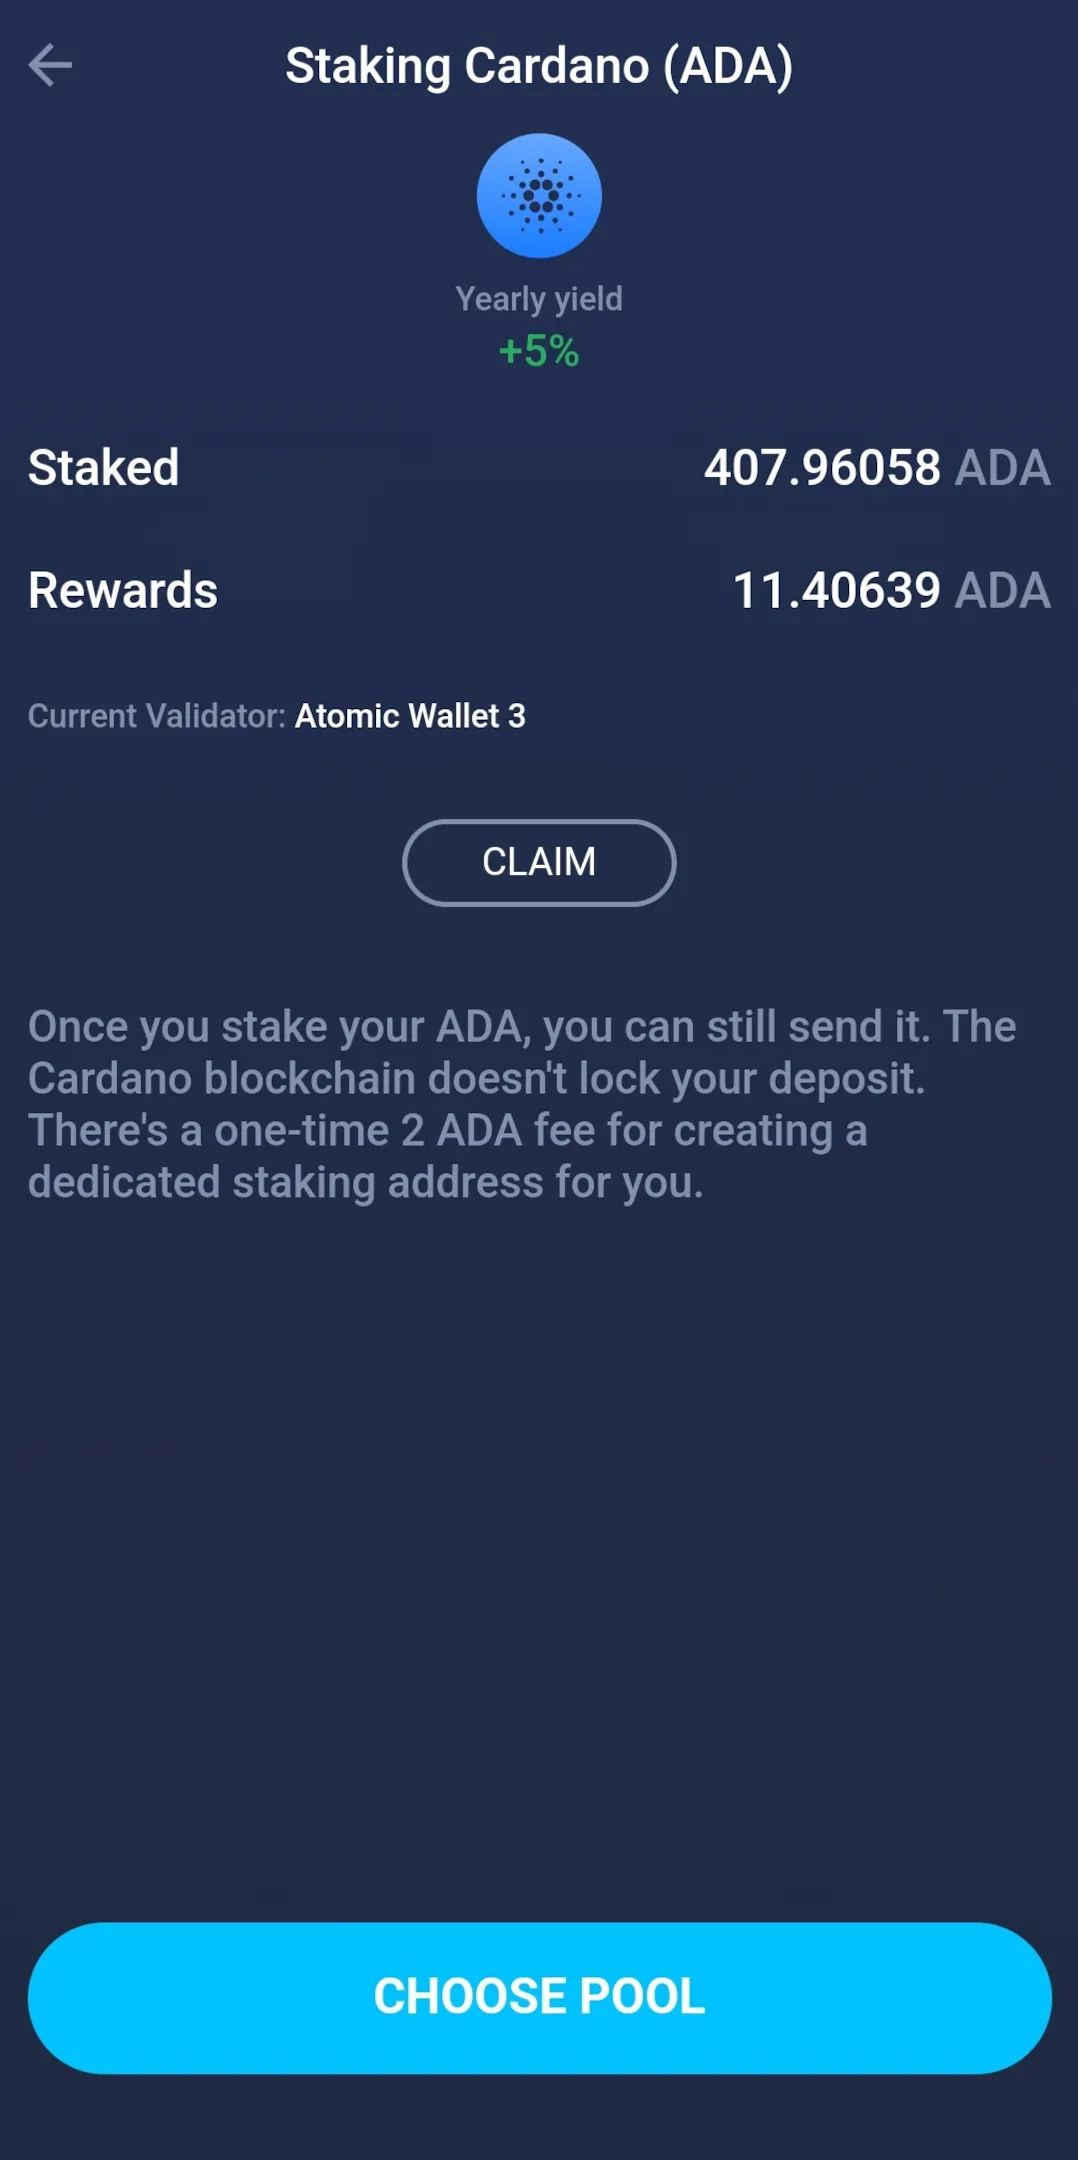 ADA staking interface in the mobile version of Atomic Wallet